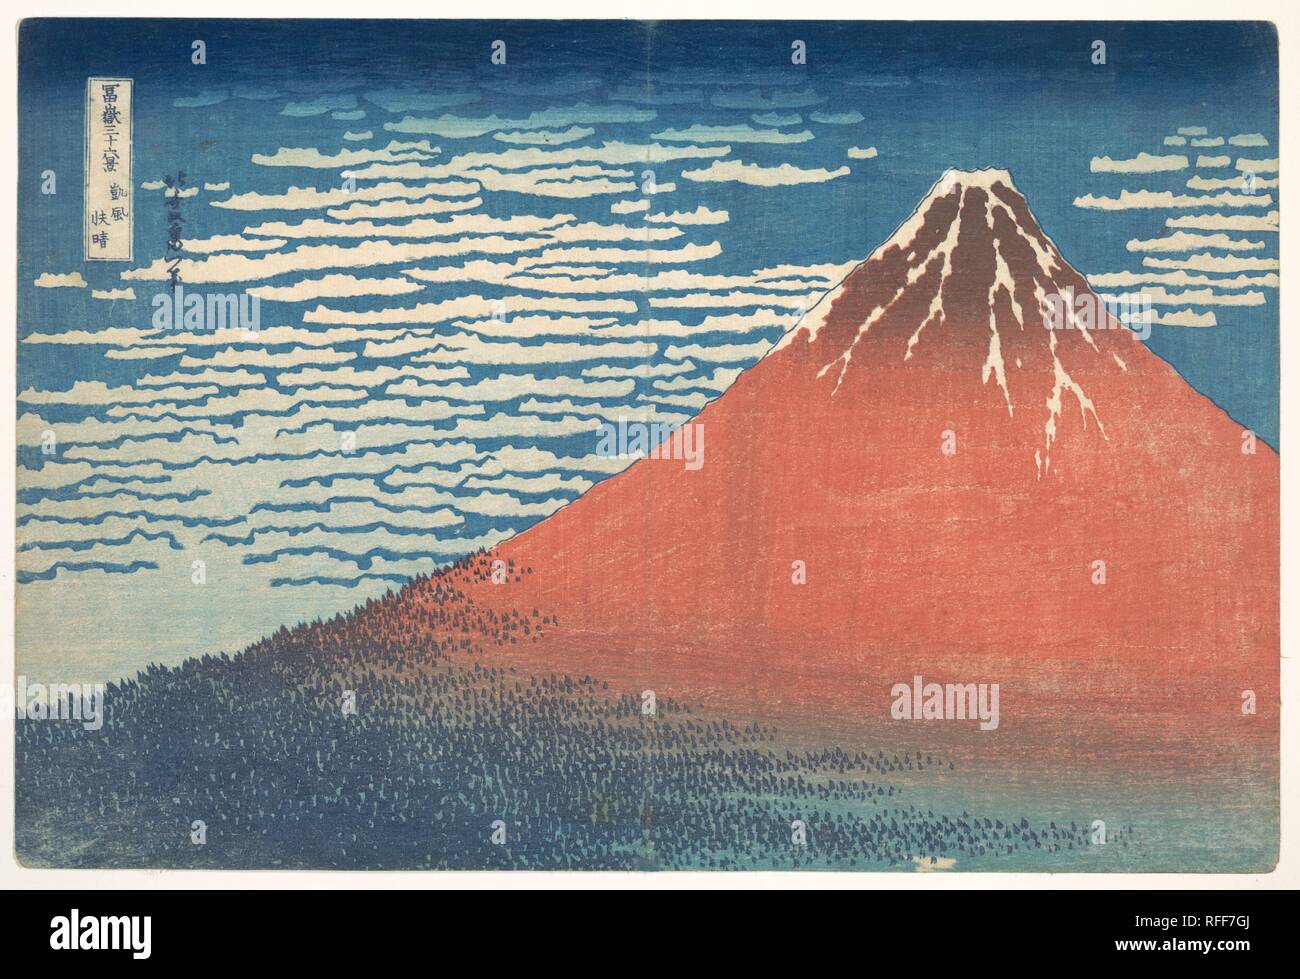 South Wind, Clear Sky (Gaifu kaisei), also known as Red Fuji, from the series Thirty-six Views of Mount Fuji (Fugaku sanjurokkei). Artist: Katsushika Hokusai (Japanese, Tokyo (Edo) 1760-1849 Tokyo (Edo)). Culture: Japan. Dimensions: Oban 10 x 14 7/8 in. (25.4 x 37.8 cm). Date: ca. 1830-32.  Mount Fuji is said to have a reddish hue at dawn in early autumn. Known as 'Red Fuji,' this print presents Hokusai's uncompromising vision of Mount Fuji without a human presence. The majestic snow-capped Mount Fuji embodies an iconic spirituality that approaches the religious. Trees are reduced to tiny tria Stock Photo